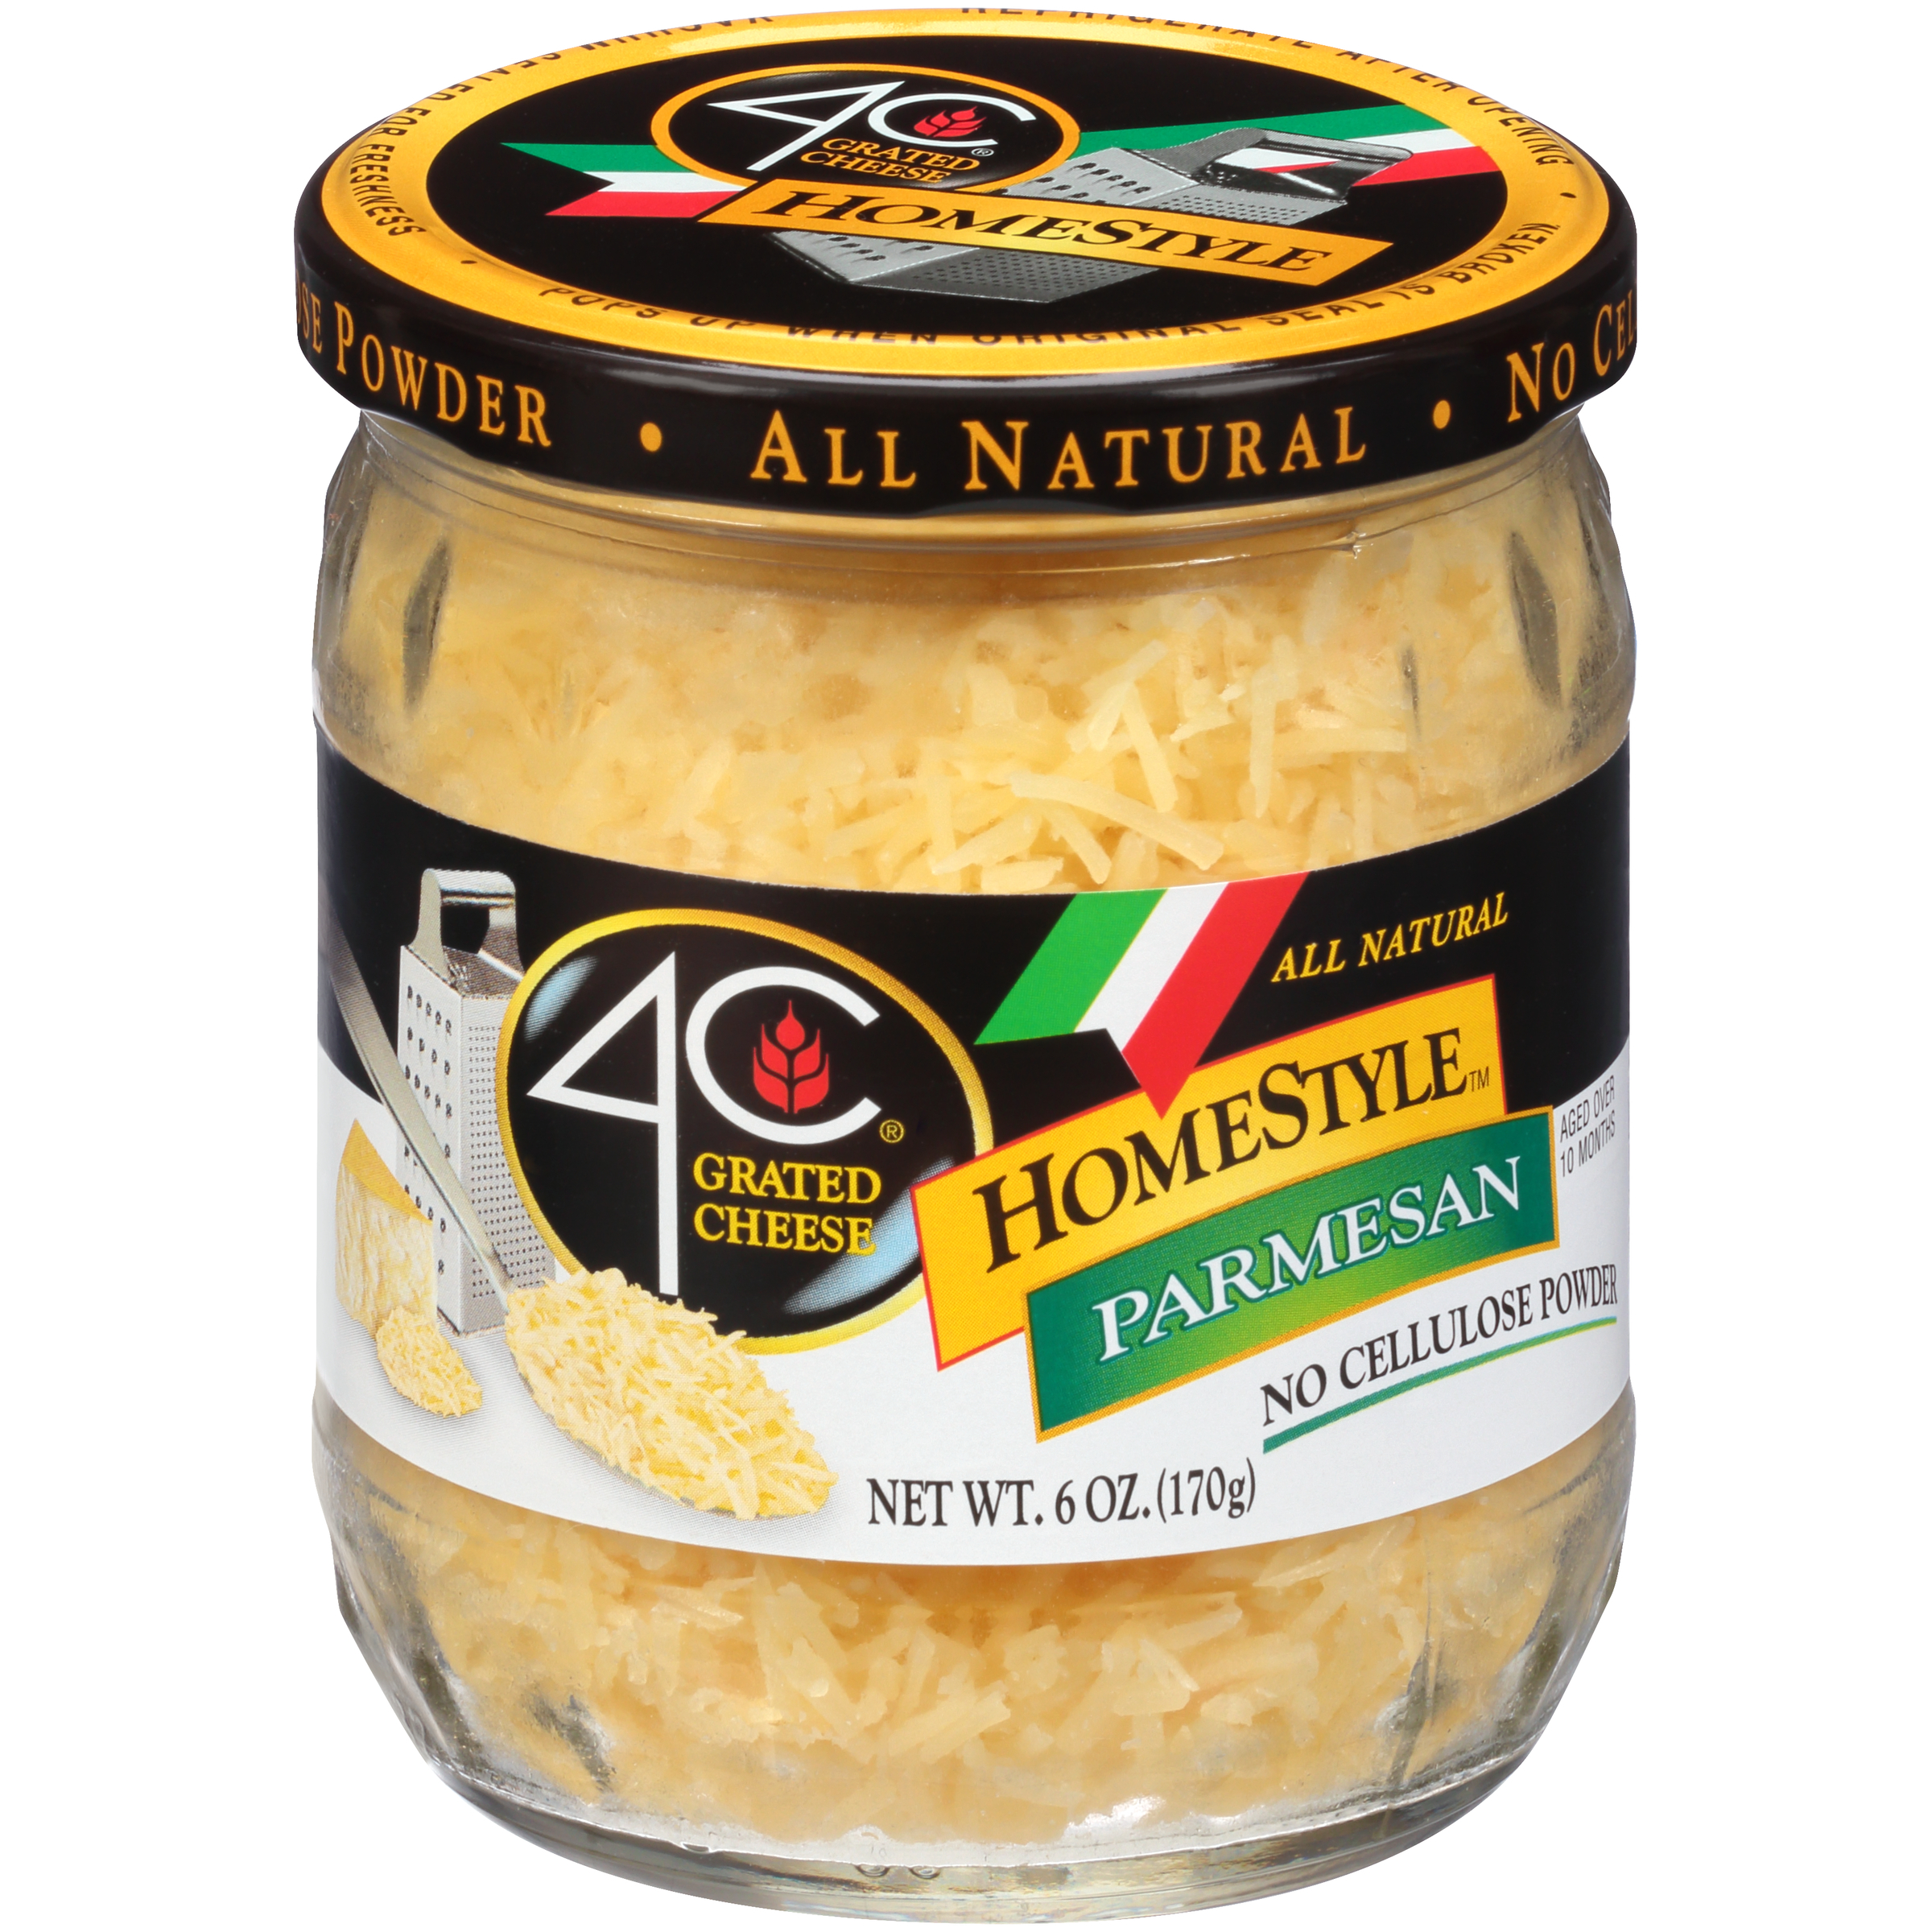 4C Homestyle Parmesan Grated Cheese 6 oz Jar - image 1 of 10